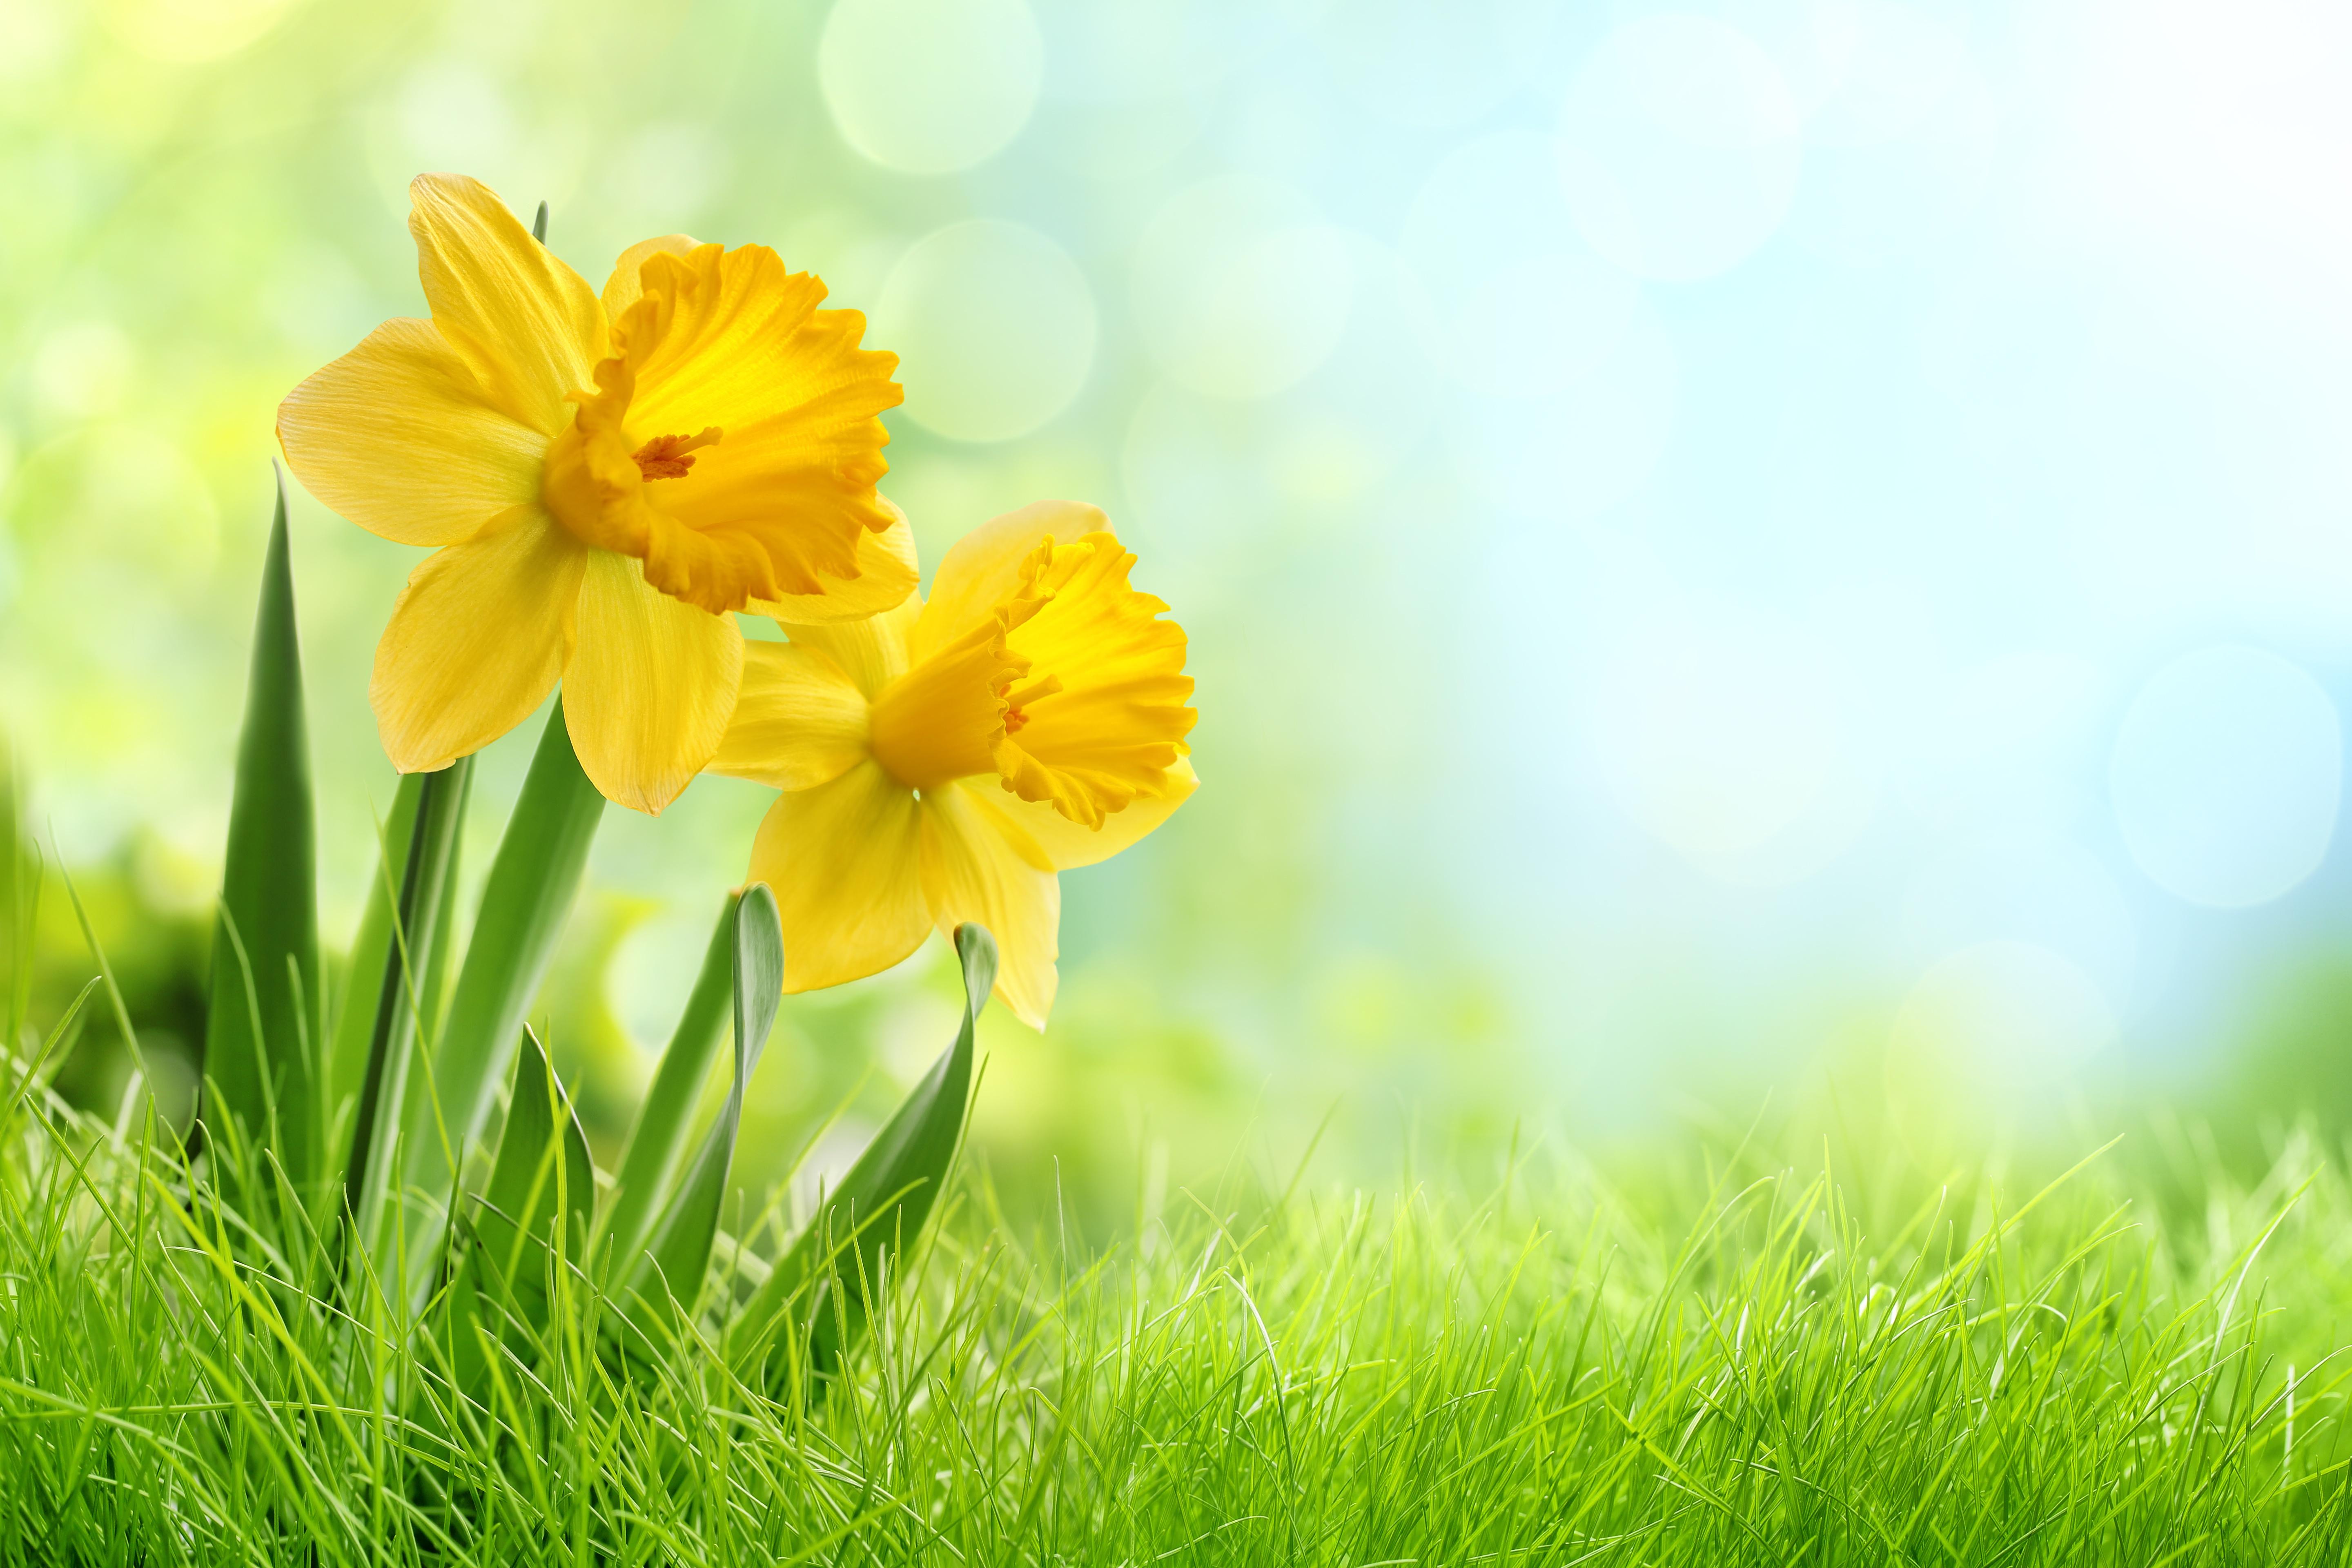 Daffodils Images Hd Desktop Wallpaper Background Free Cool High Images